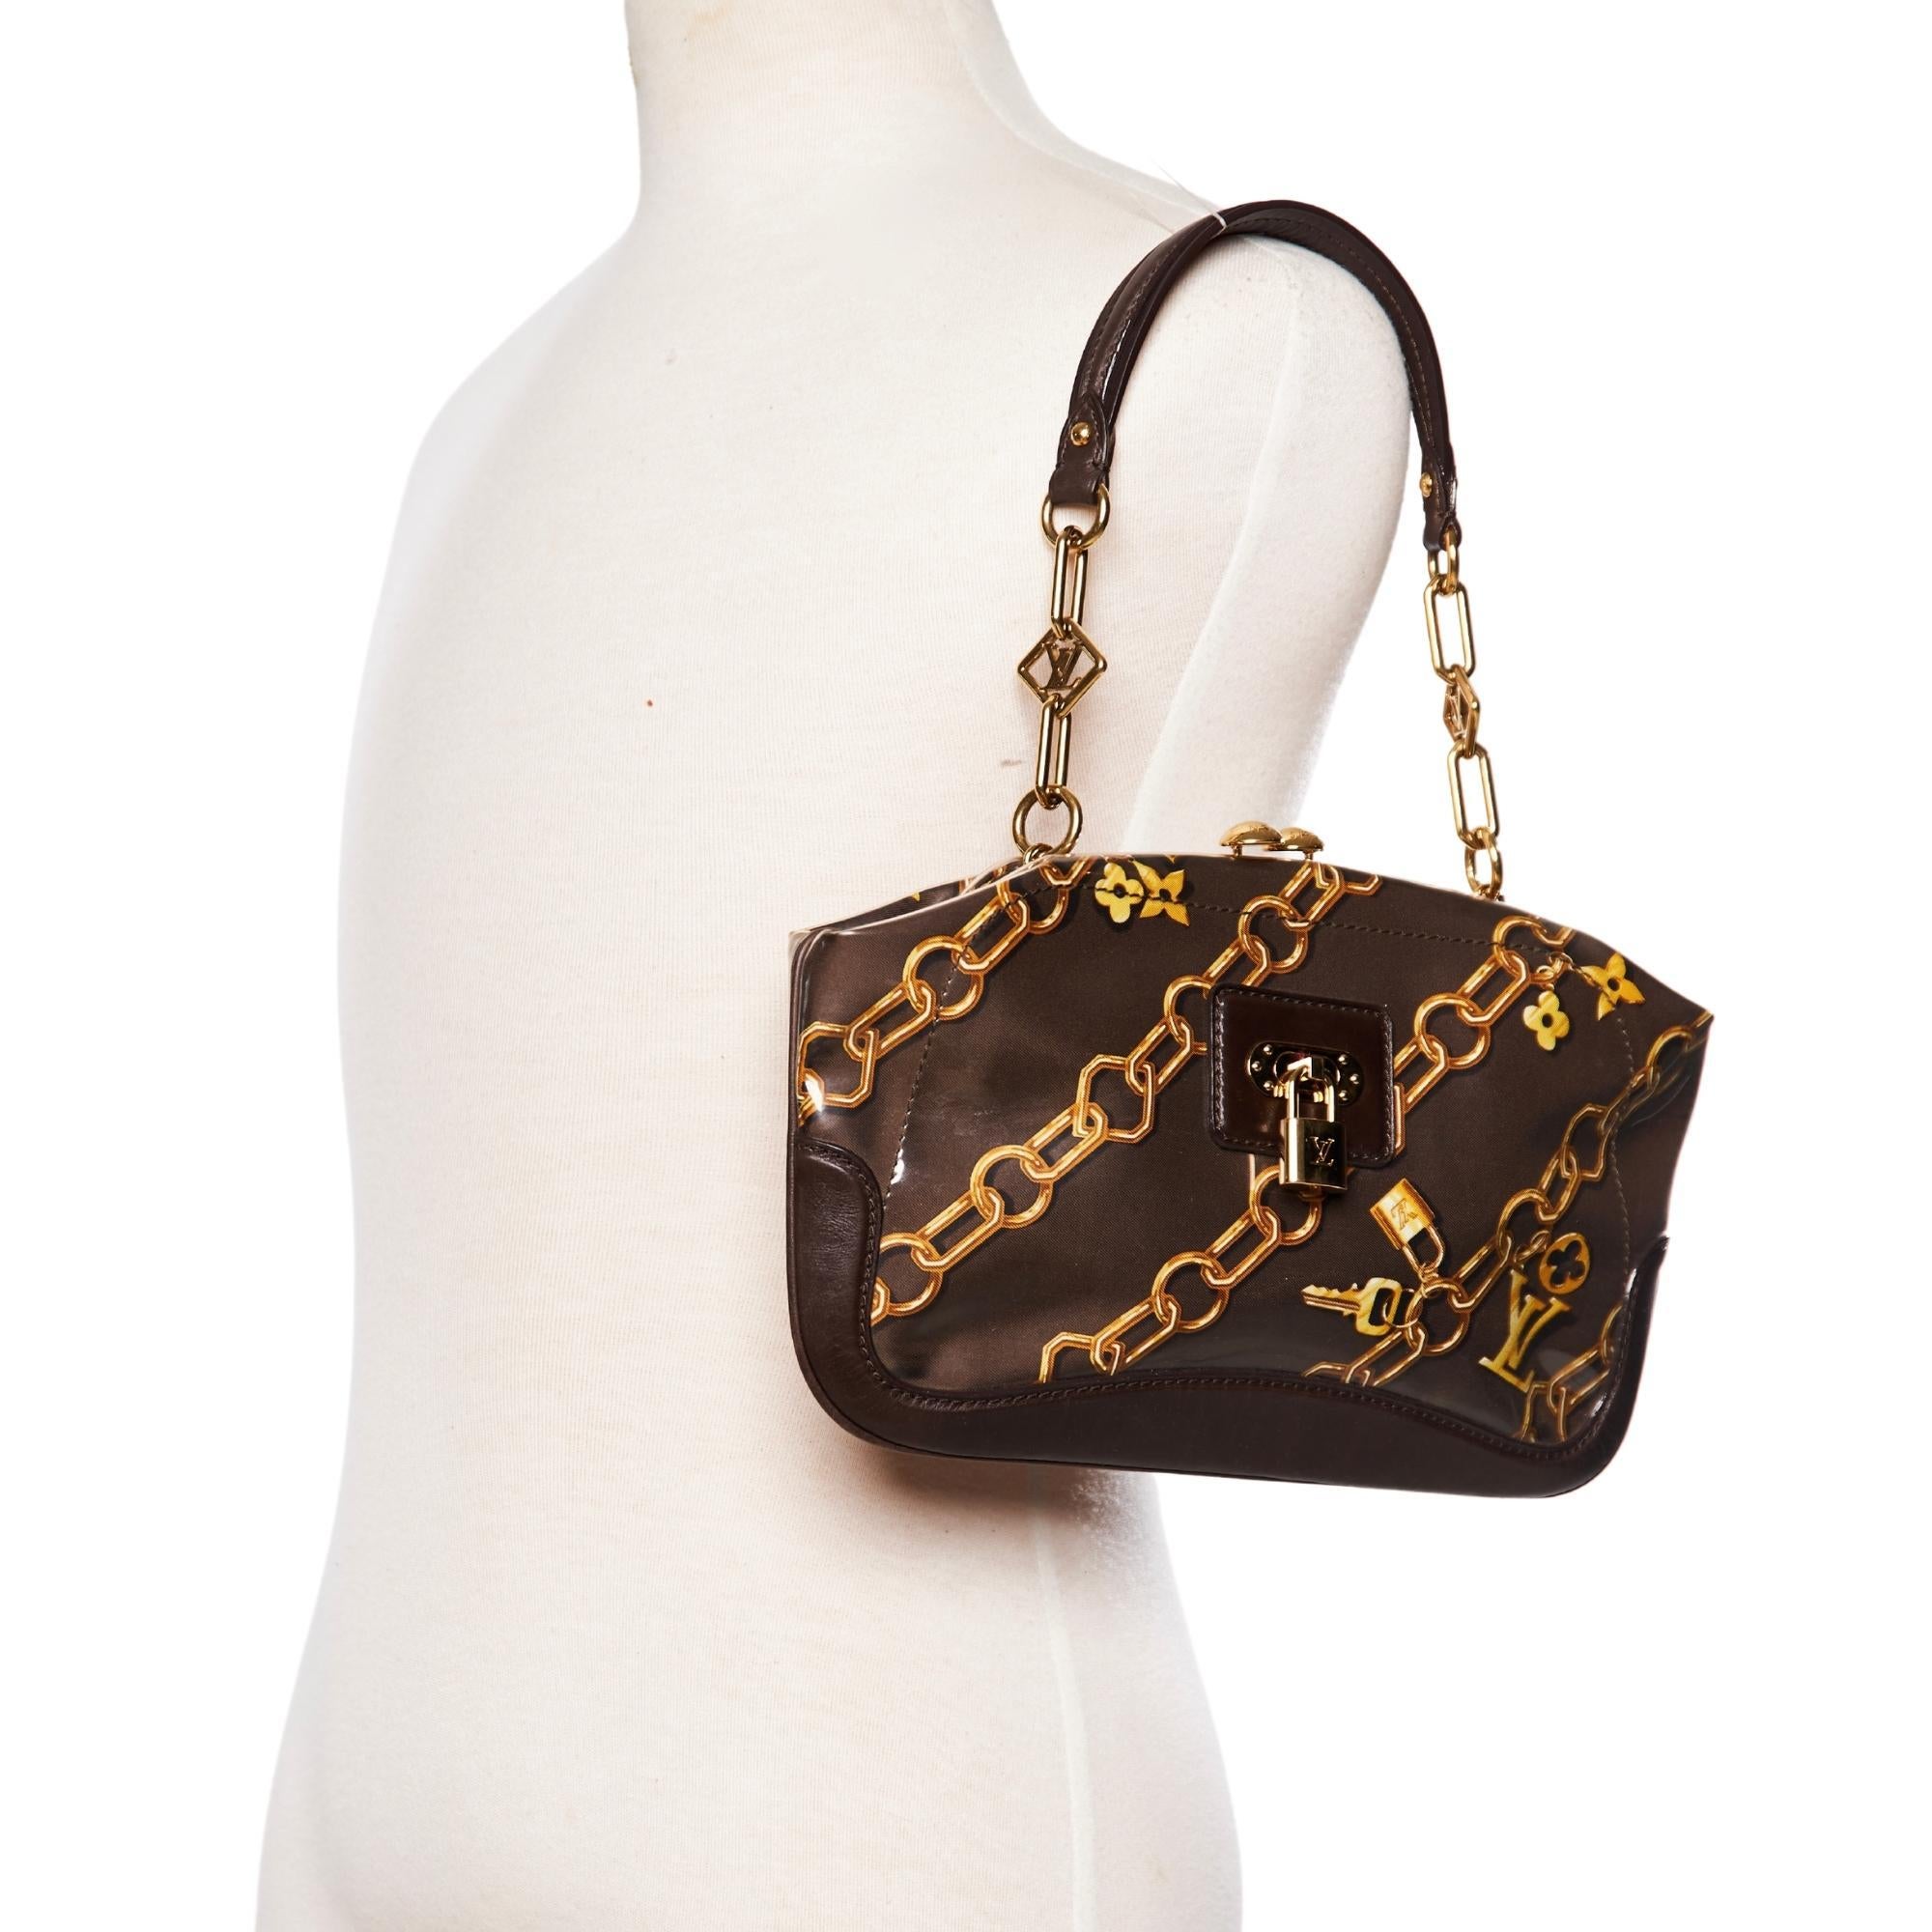 Designed by Marc Jacobs for the spring/summer 2006 collection, only available for VIP customers, this line was inspired by the 1960's It features a Monogram Charm print on silk protected by crystal vinyl trimmed with dark brown leather. The bag also